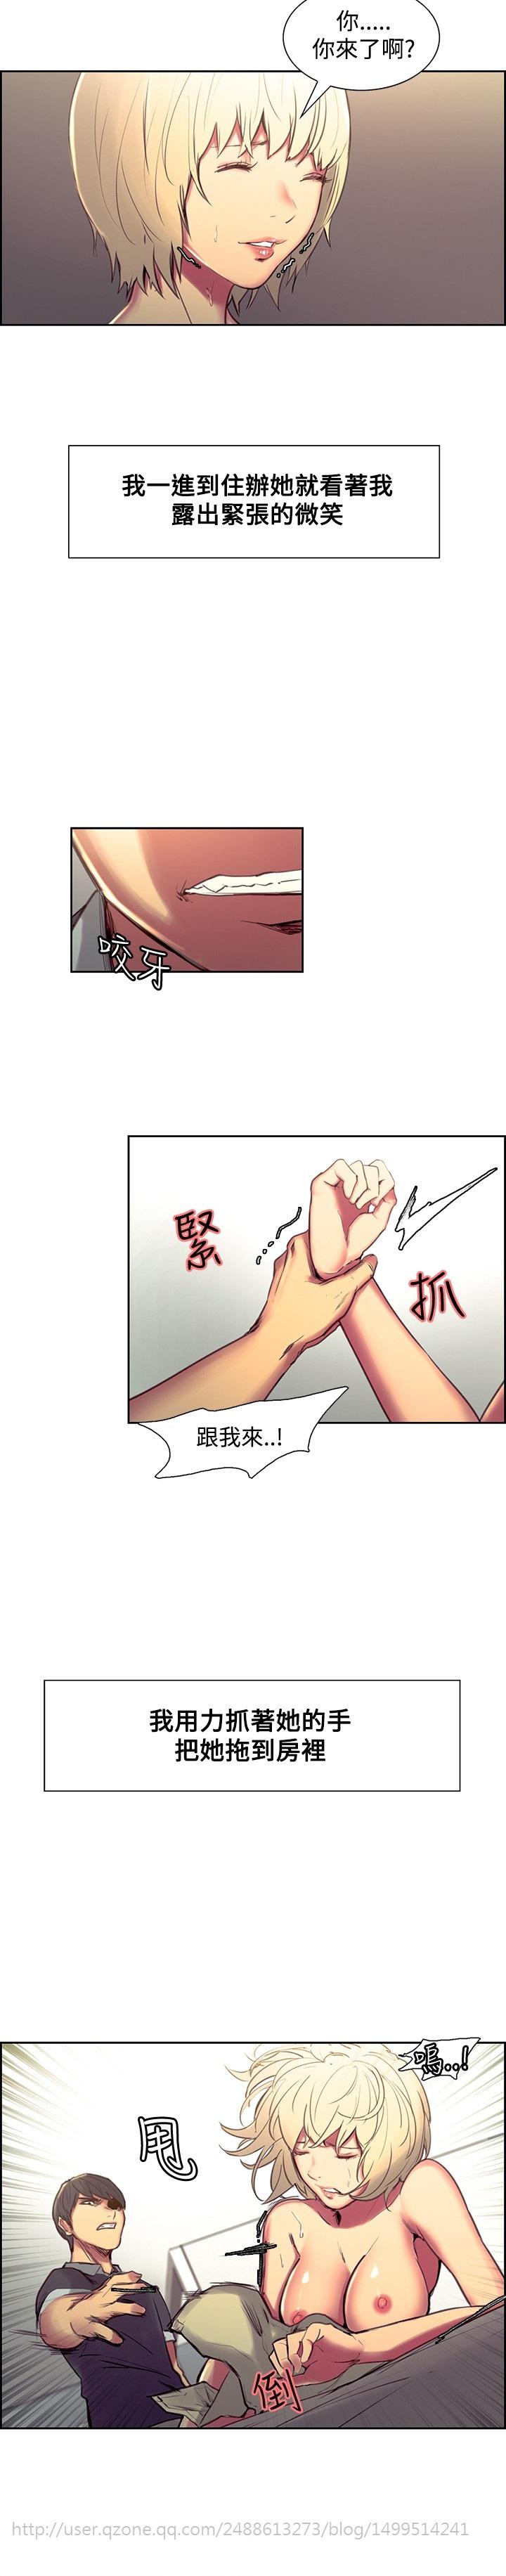 [Serious] Domesticate the Housekeeper 调教家政妇 Ch.29~44END [Chinese]中文 96